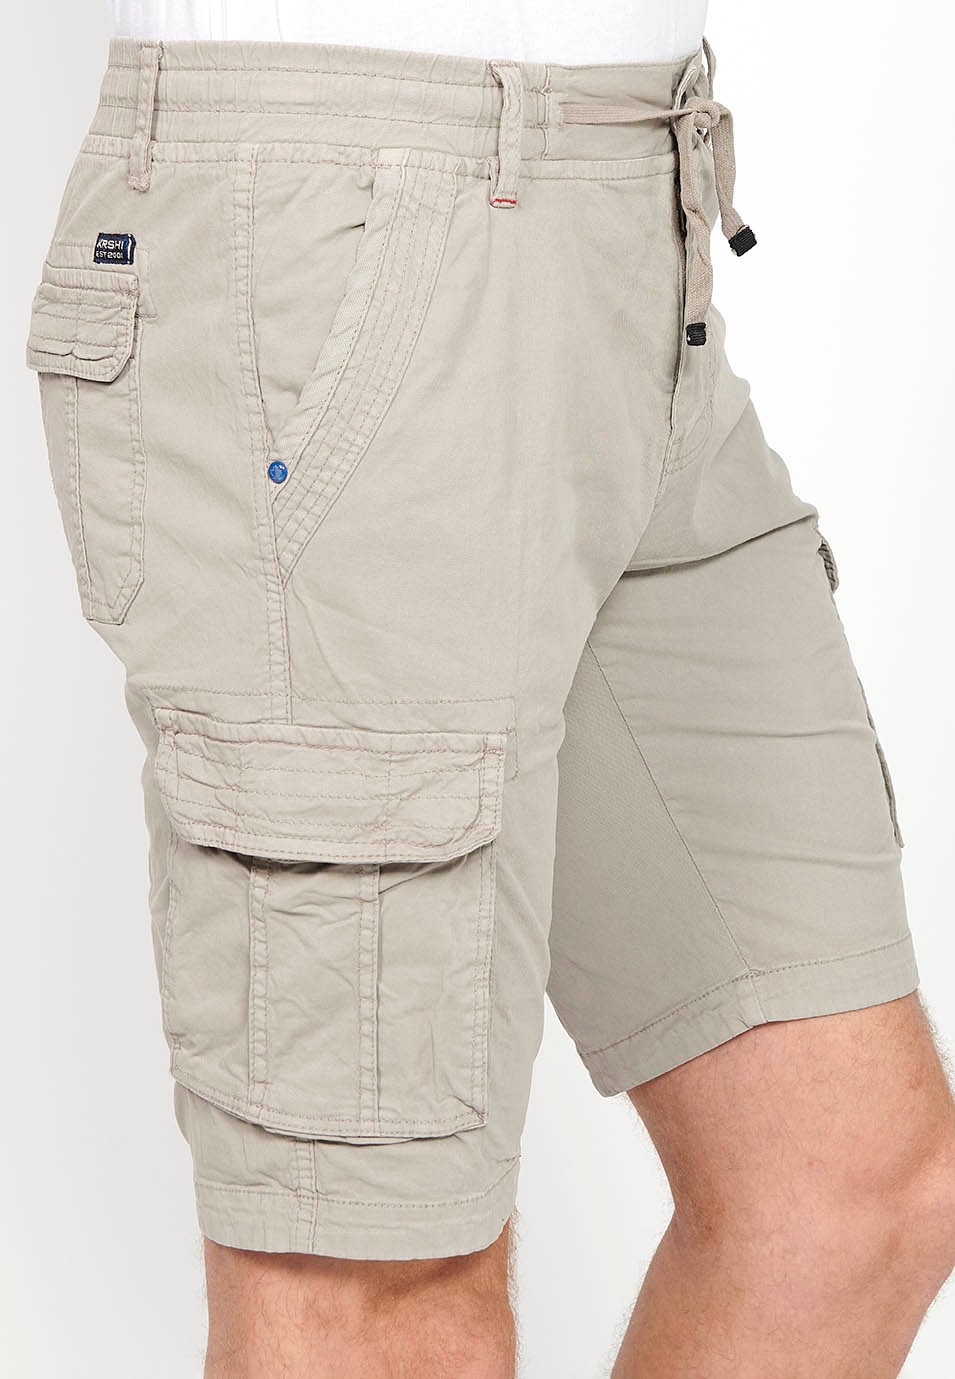 Cargo shorts with front closure with zipper and button and four pockets, two back pockets with flap with two cargo pockets with flap and adjustable waist with drawstring in Stone Color for Men